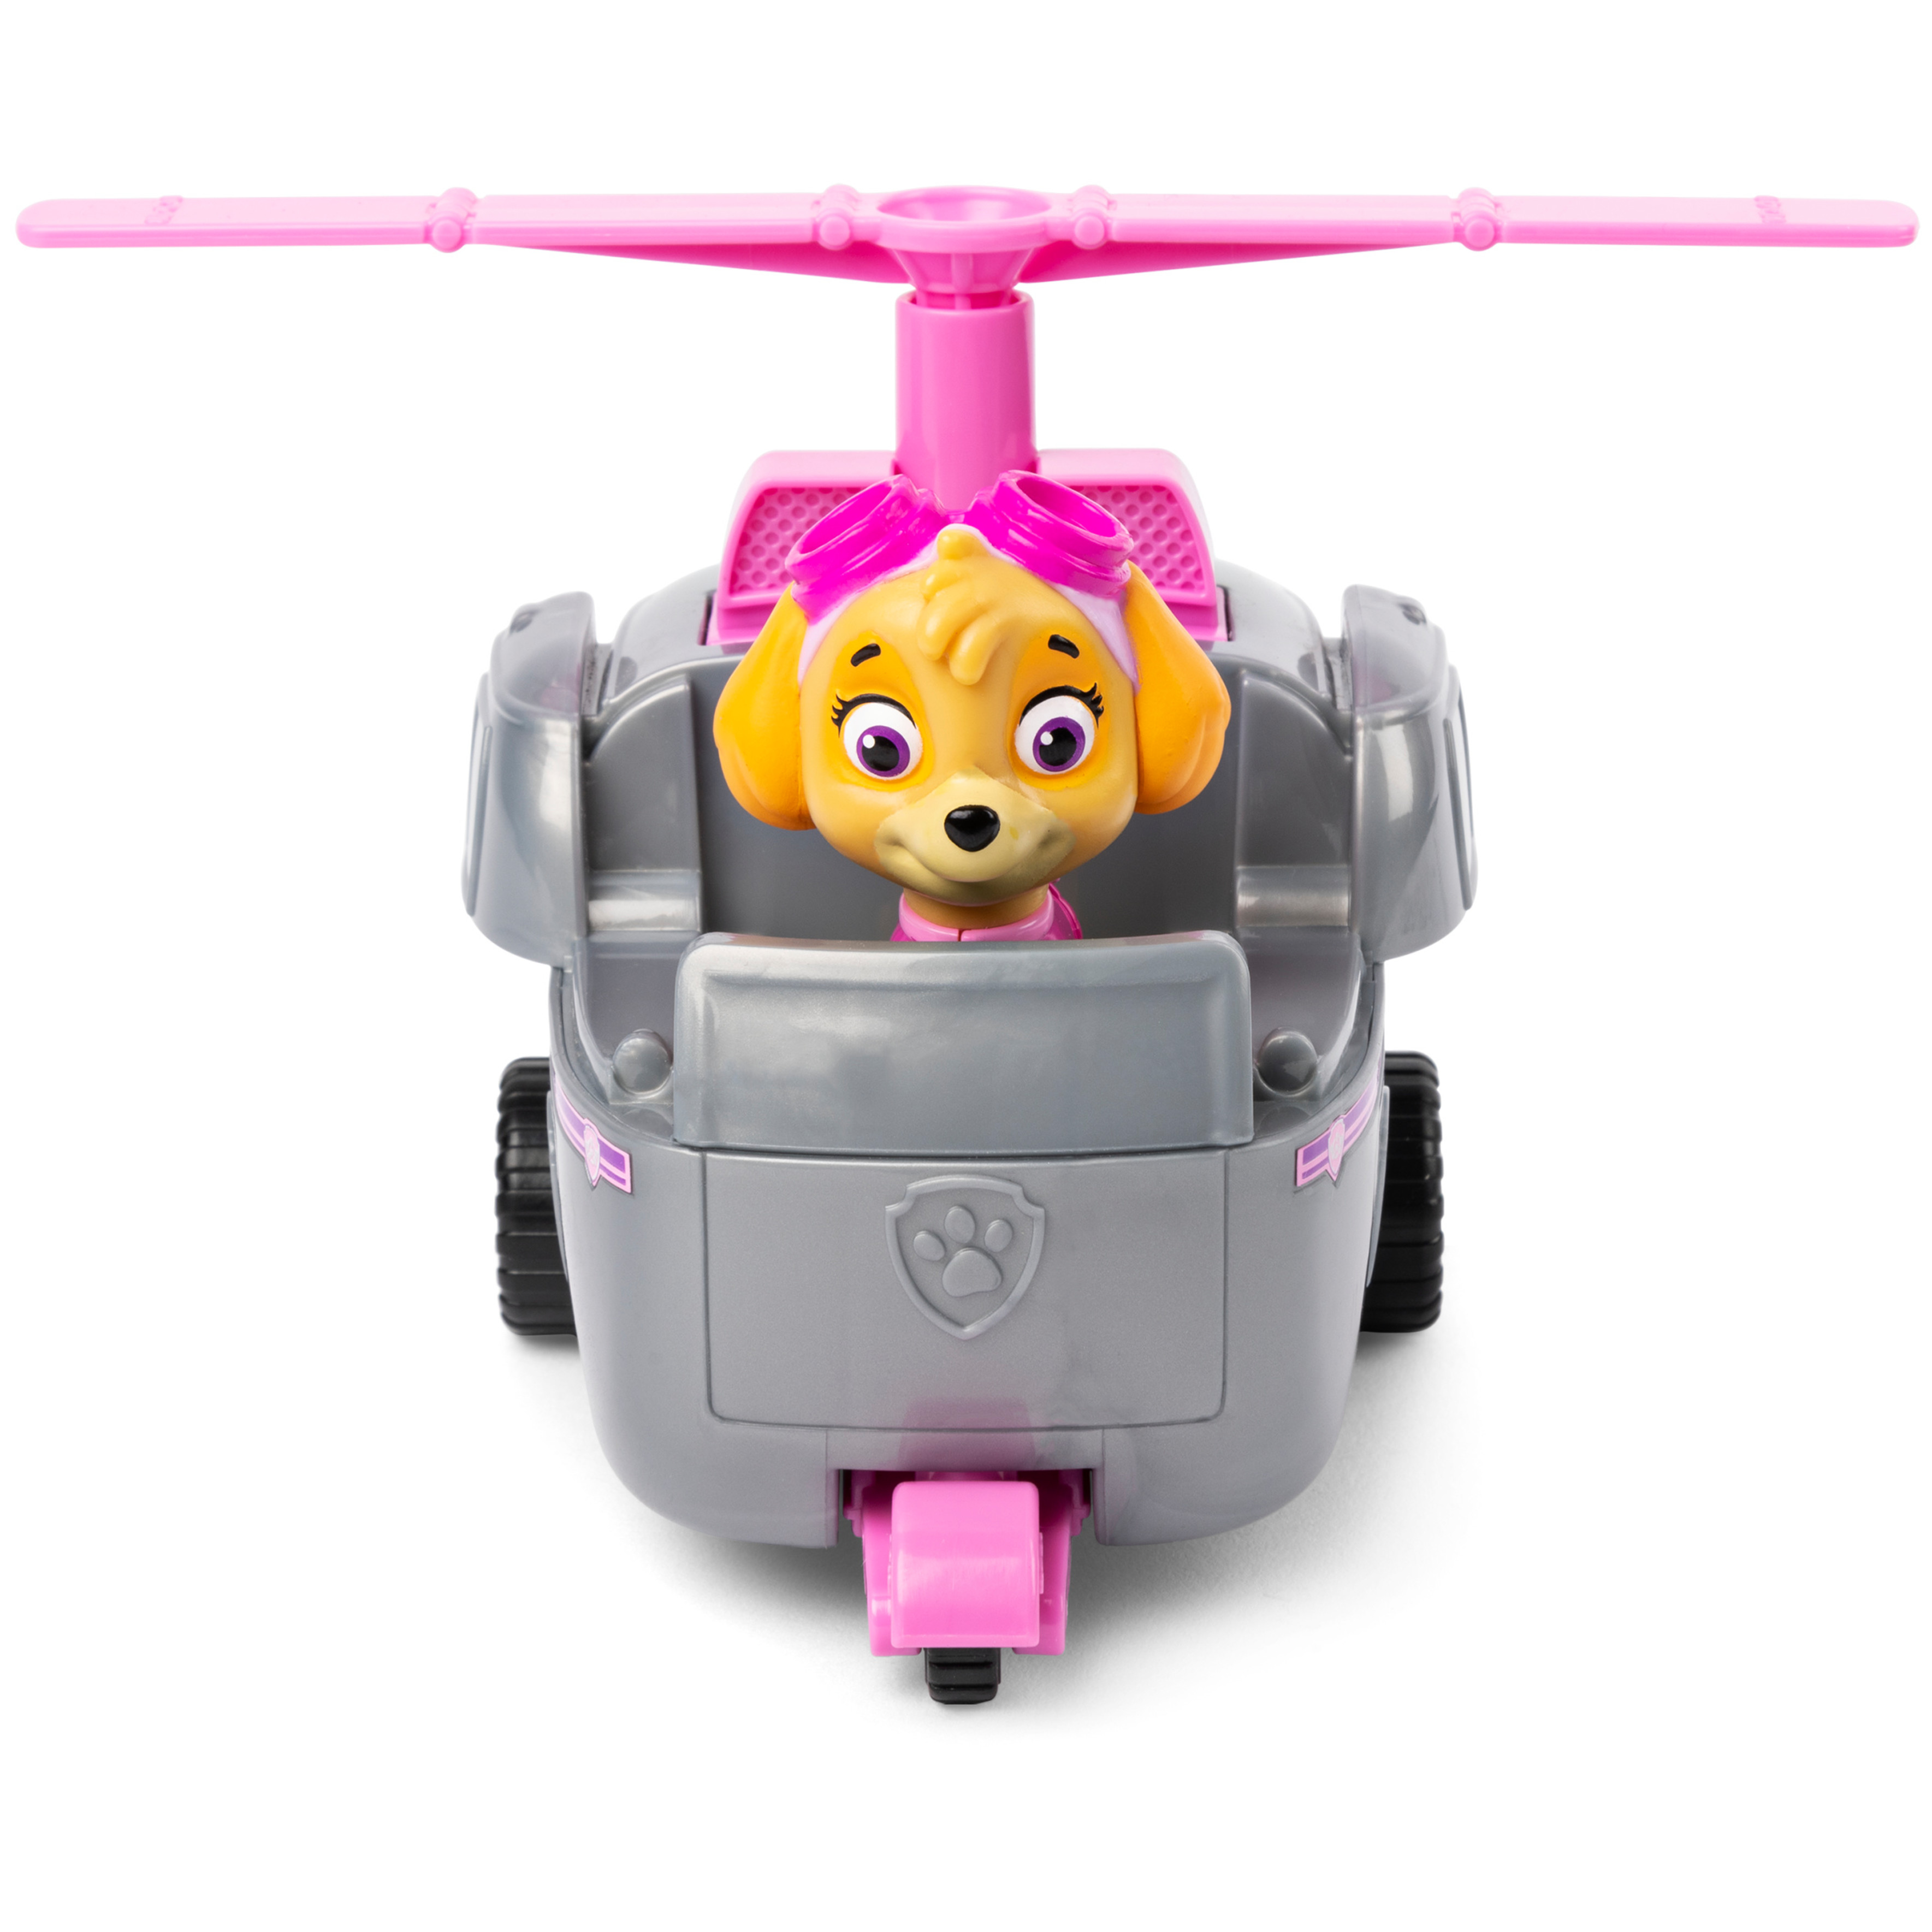 PAW Patrol, Skye’s Helicopter Vehicle with Collectible Figure, for Kids Aged 3 and Up - image 5 of 5